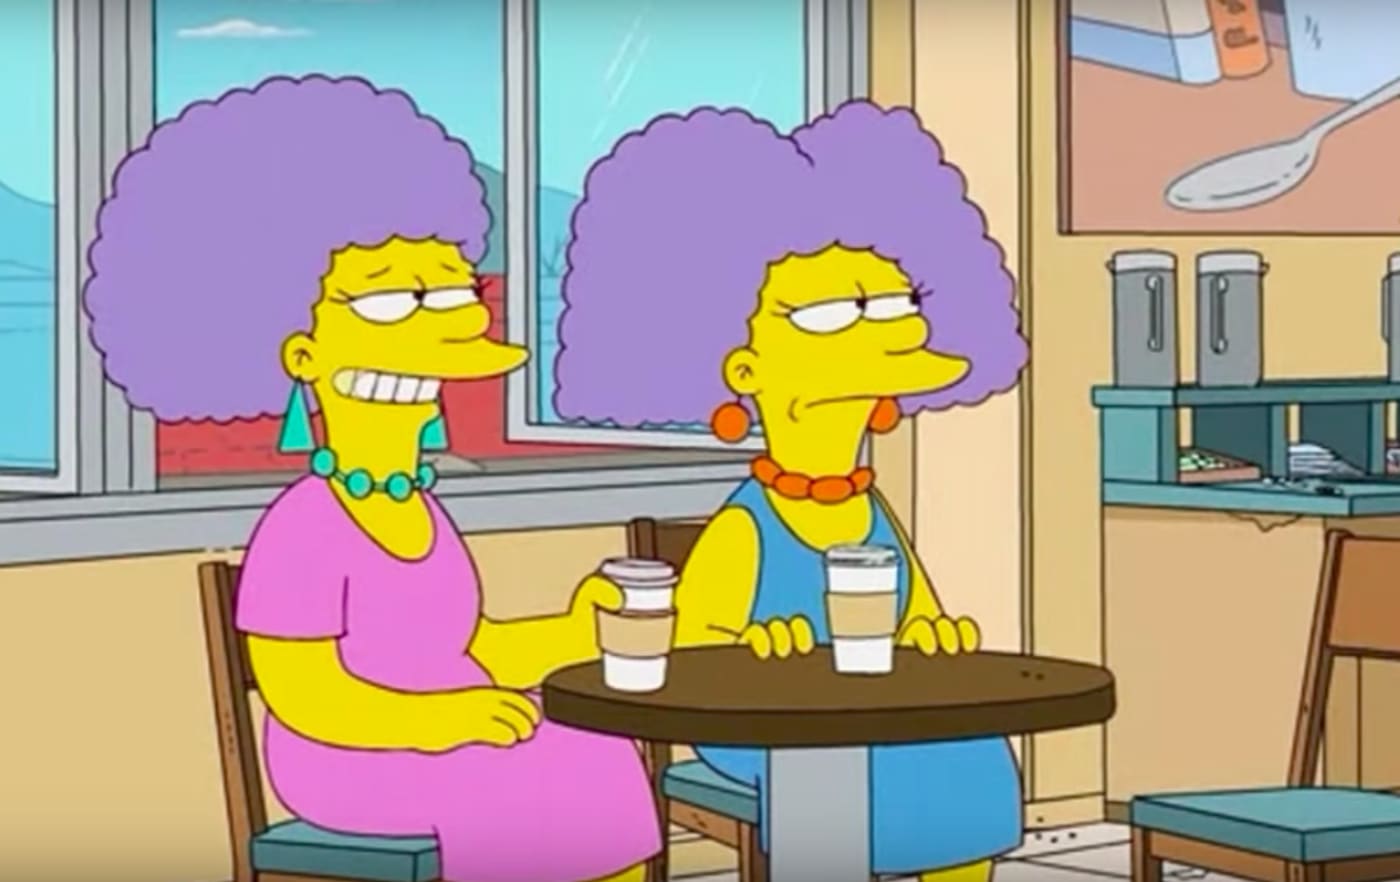 1. Marge Simpson's sisters Patty and Selma - wide 8